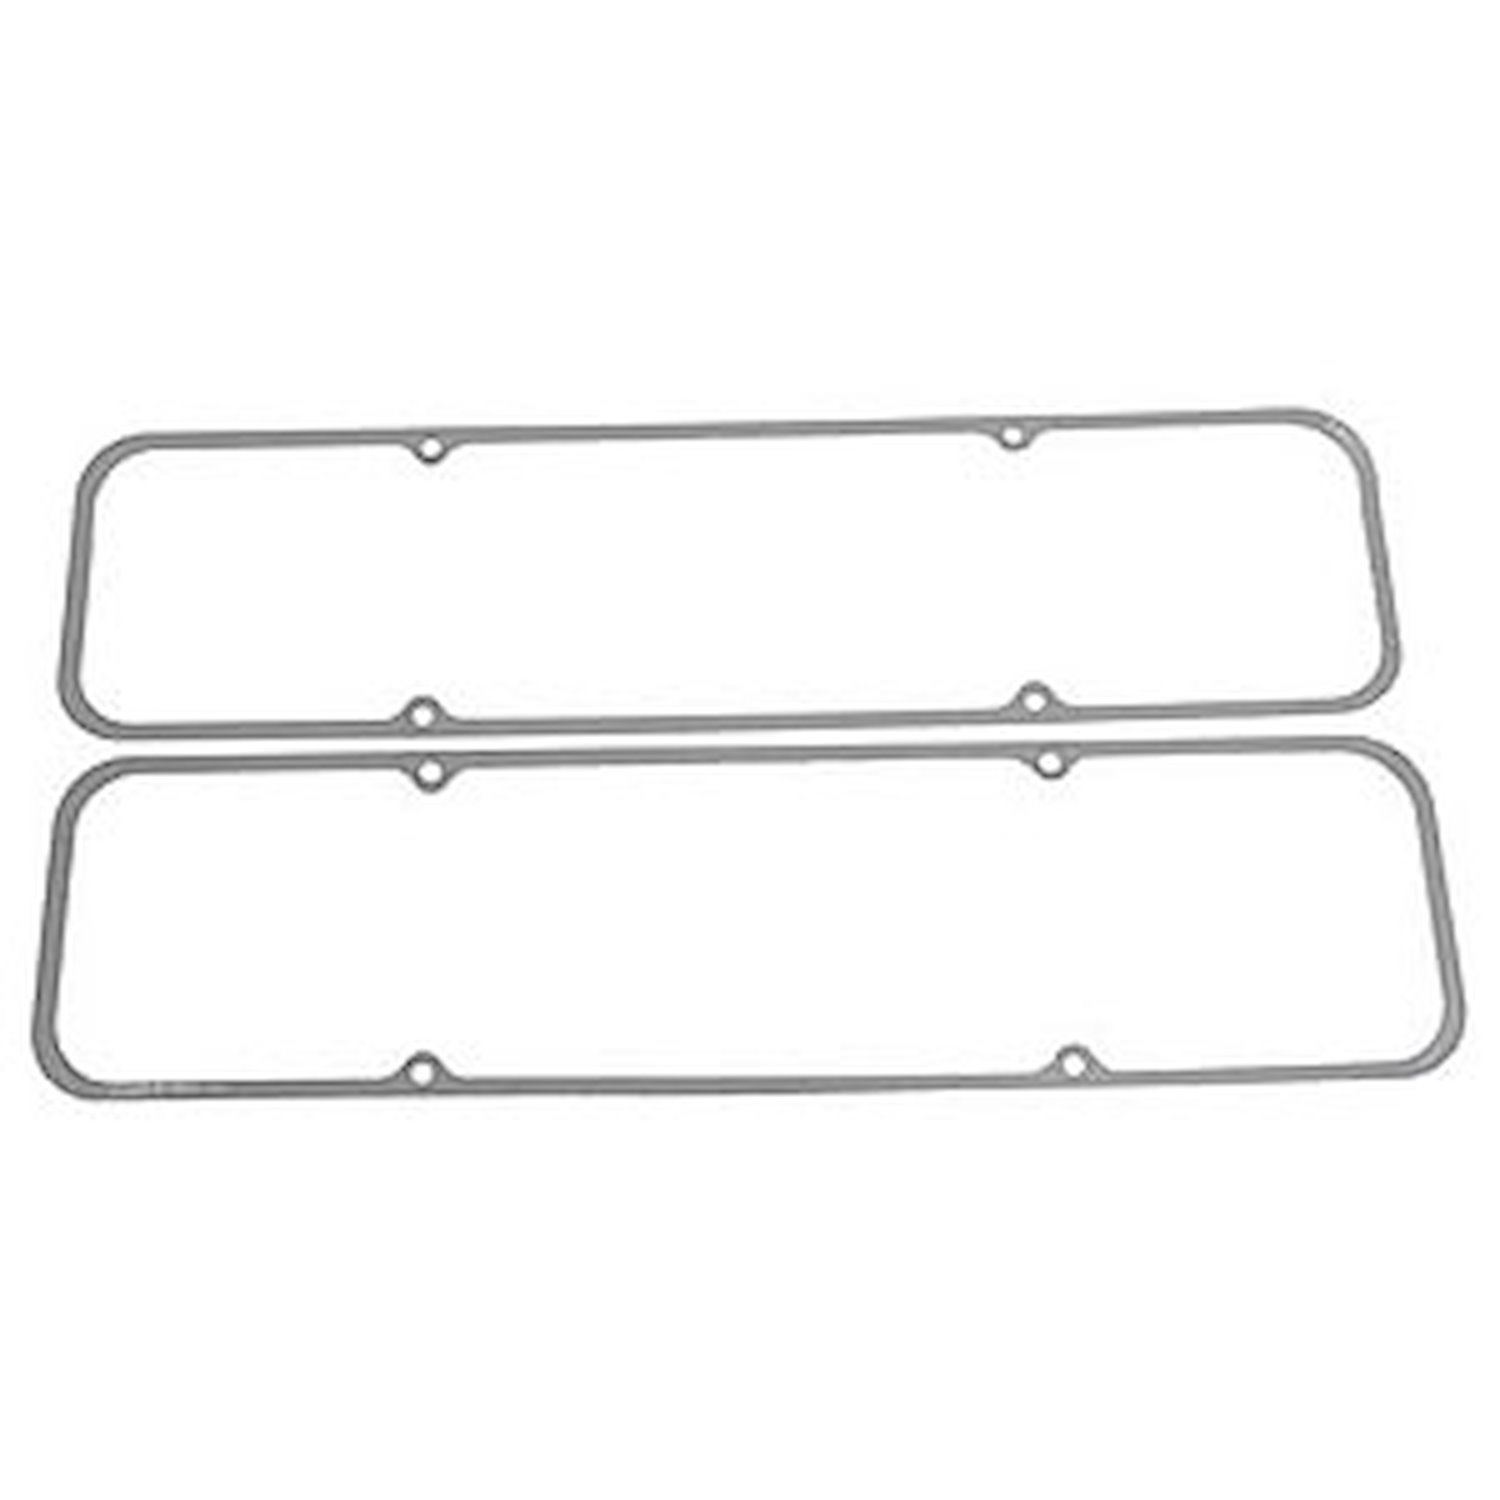 Valve Cover Gaskets Chevy Big Block 396/402/427/454